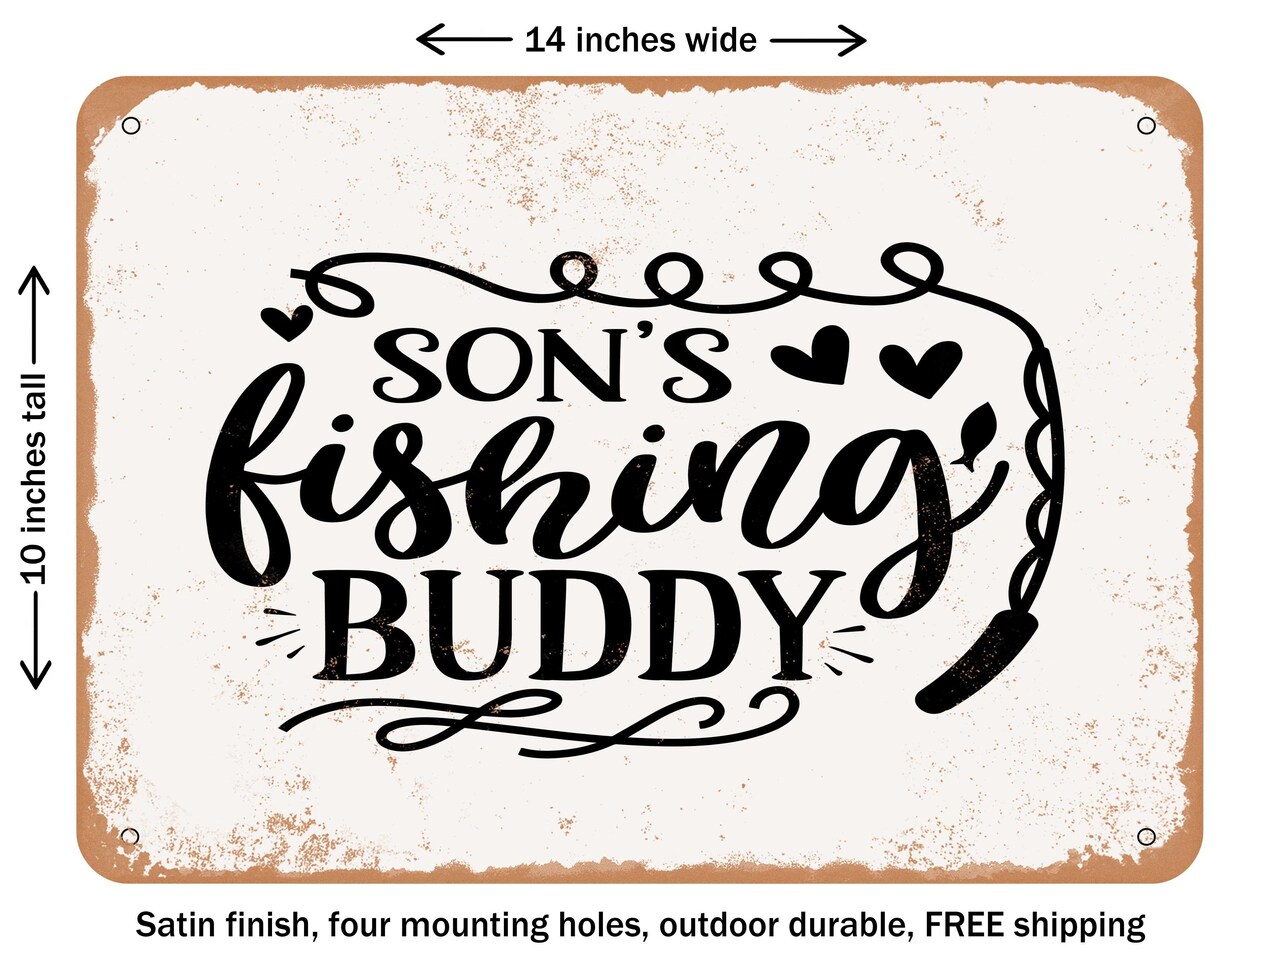 DECORATIVE METAL SIGN - Sons Fishing Buddy - Vintage Rusty Look